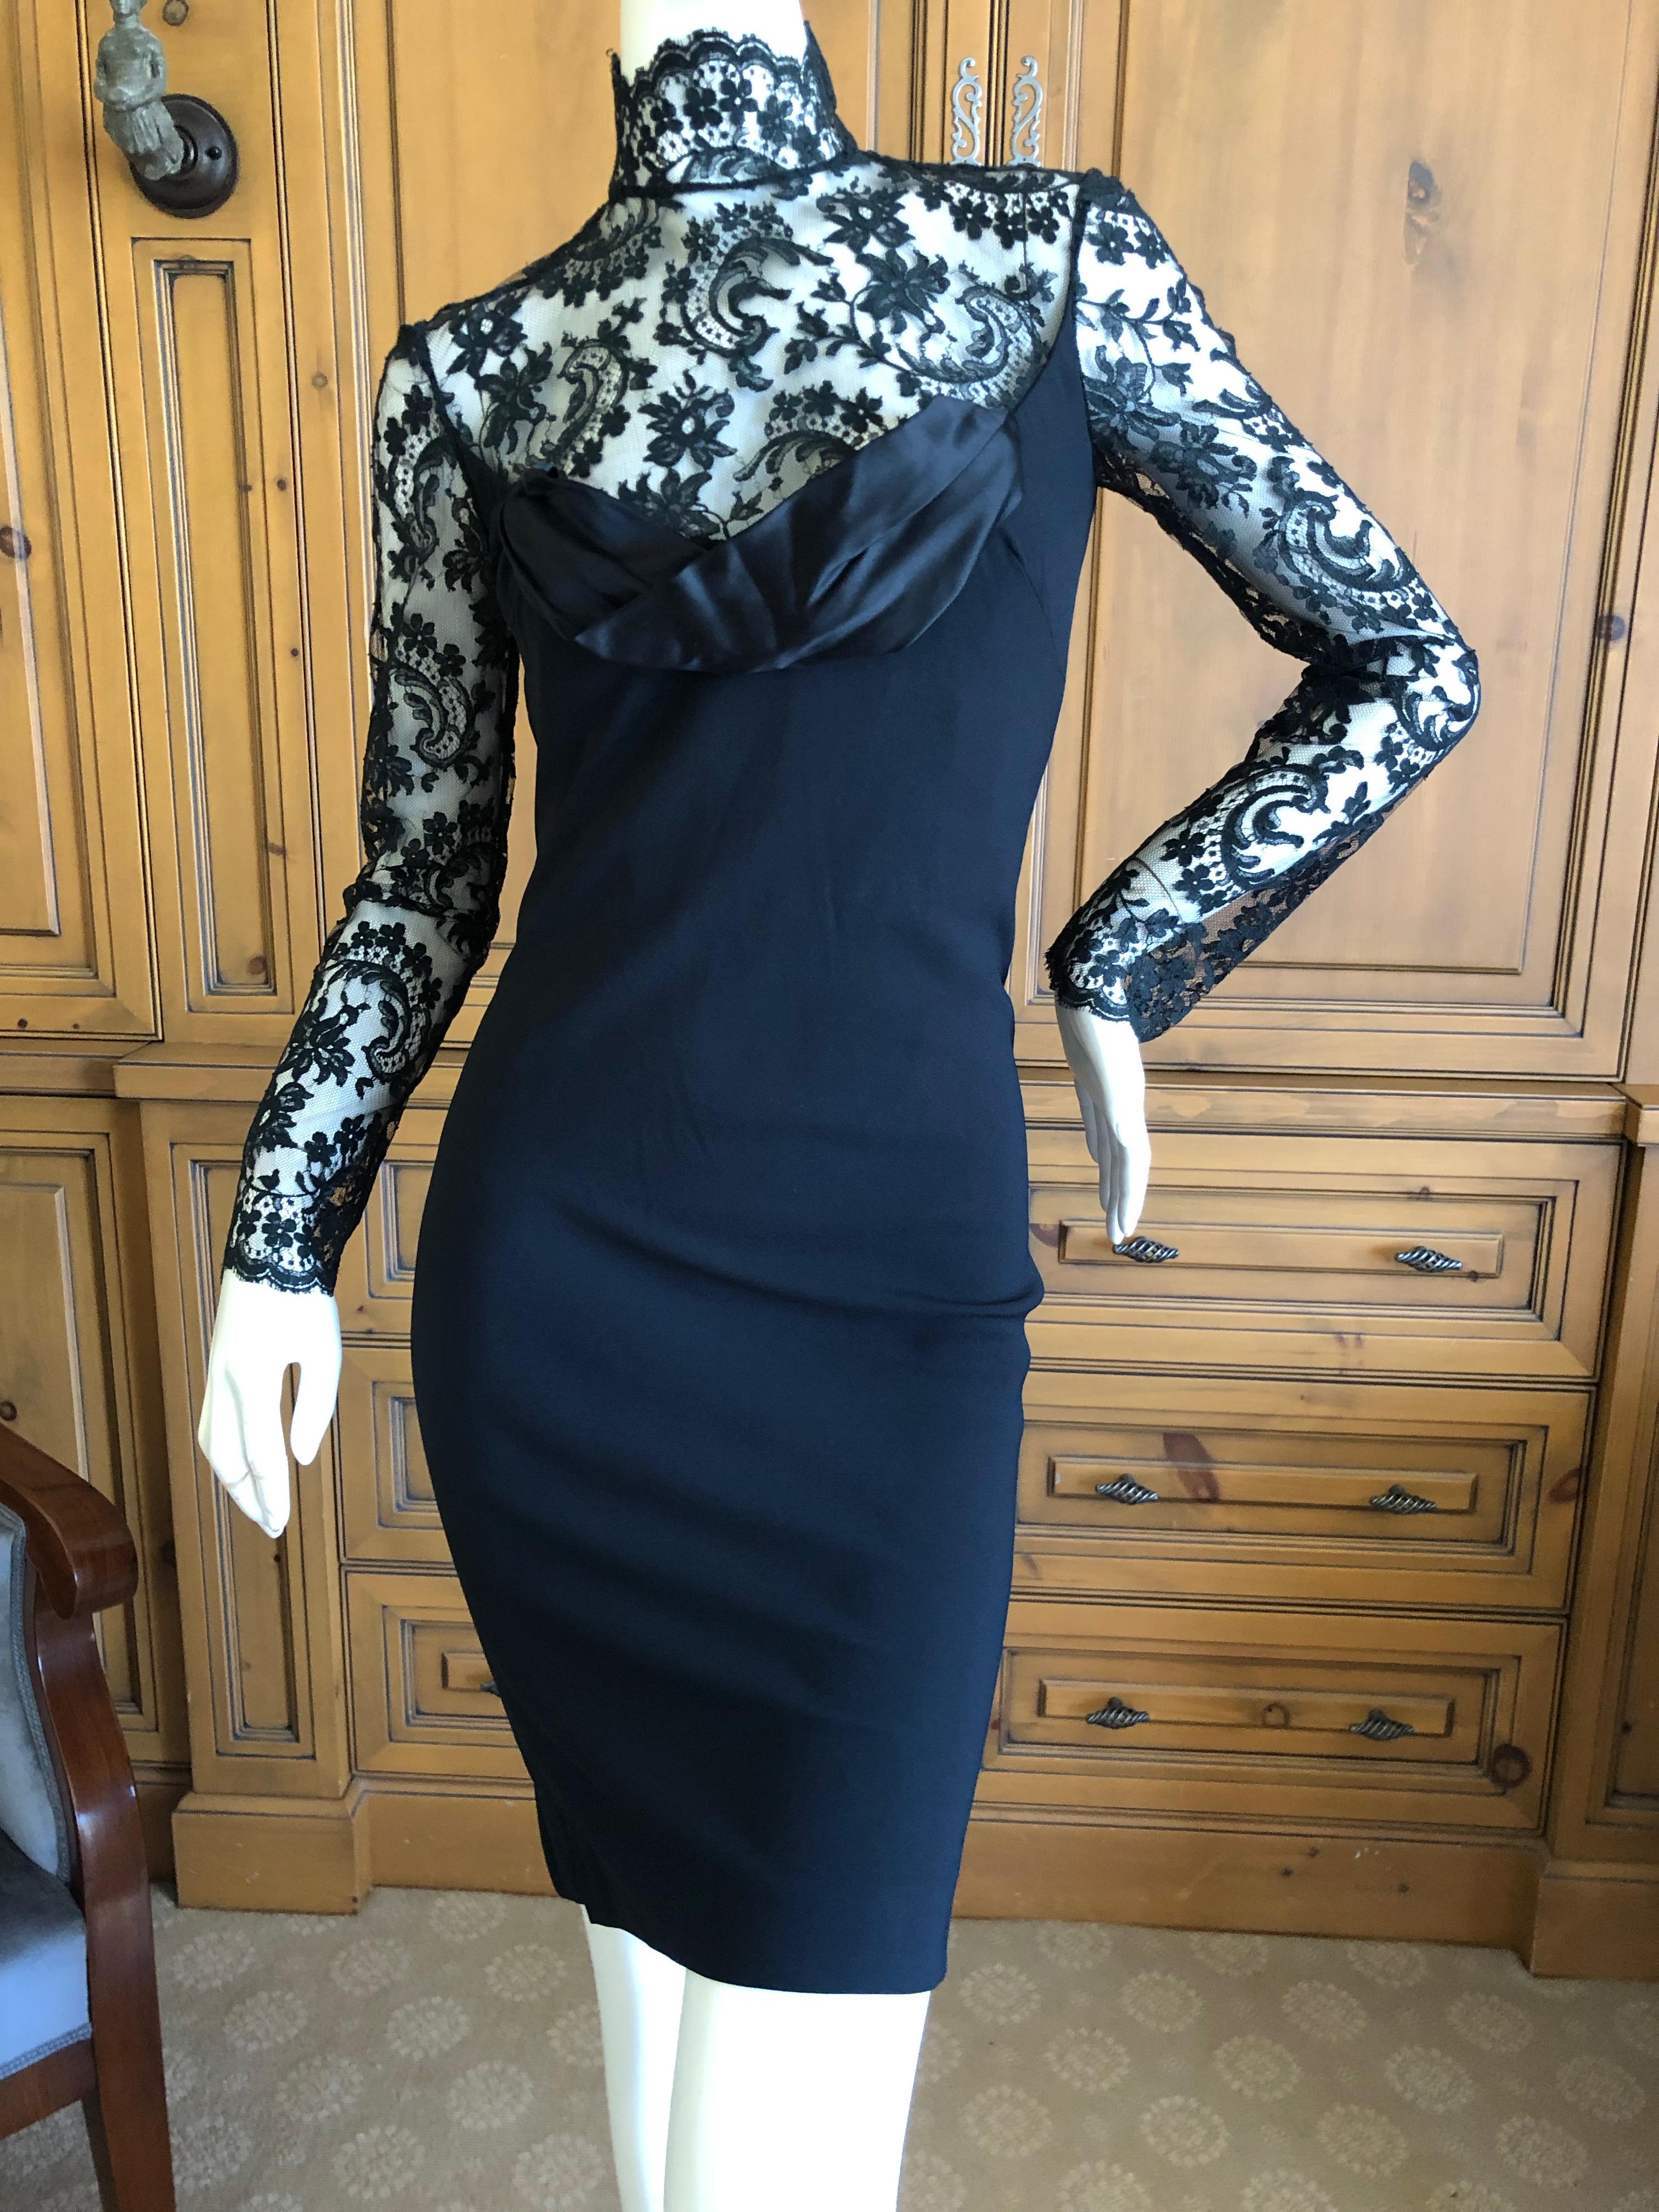 Givenchy Haute Couture by John Galliano Black Lace Cocktail Dress For Sale 2